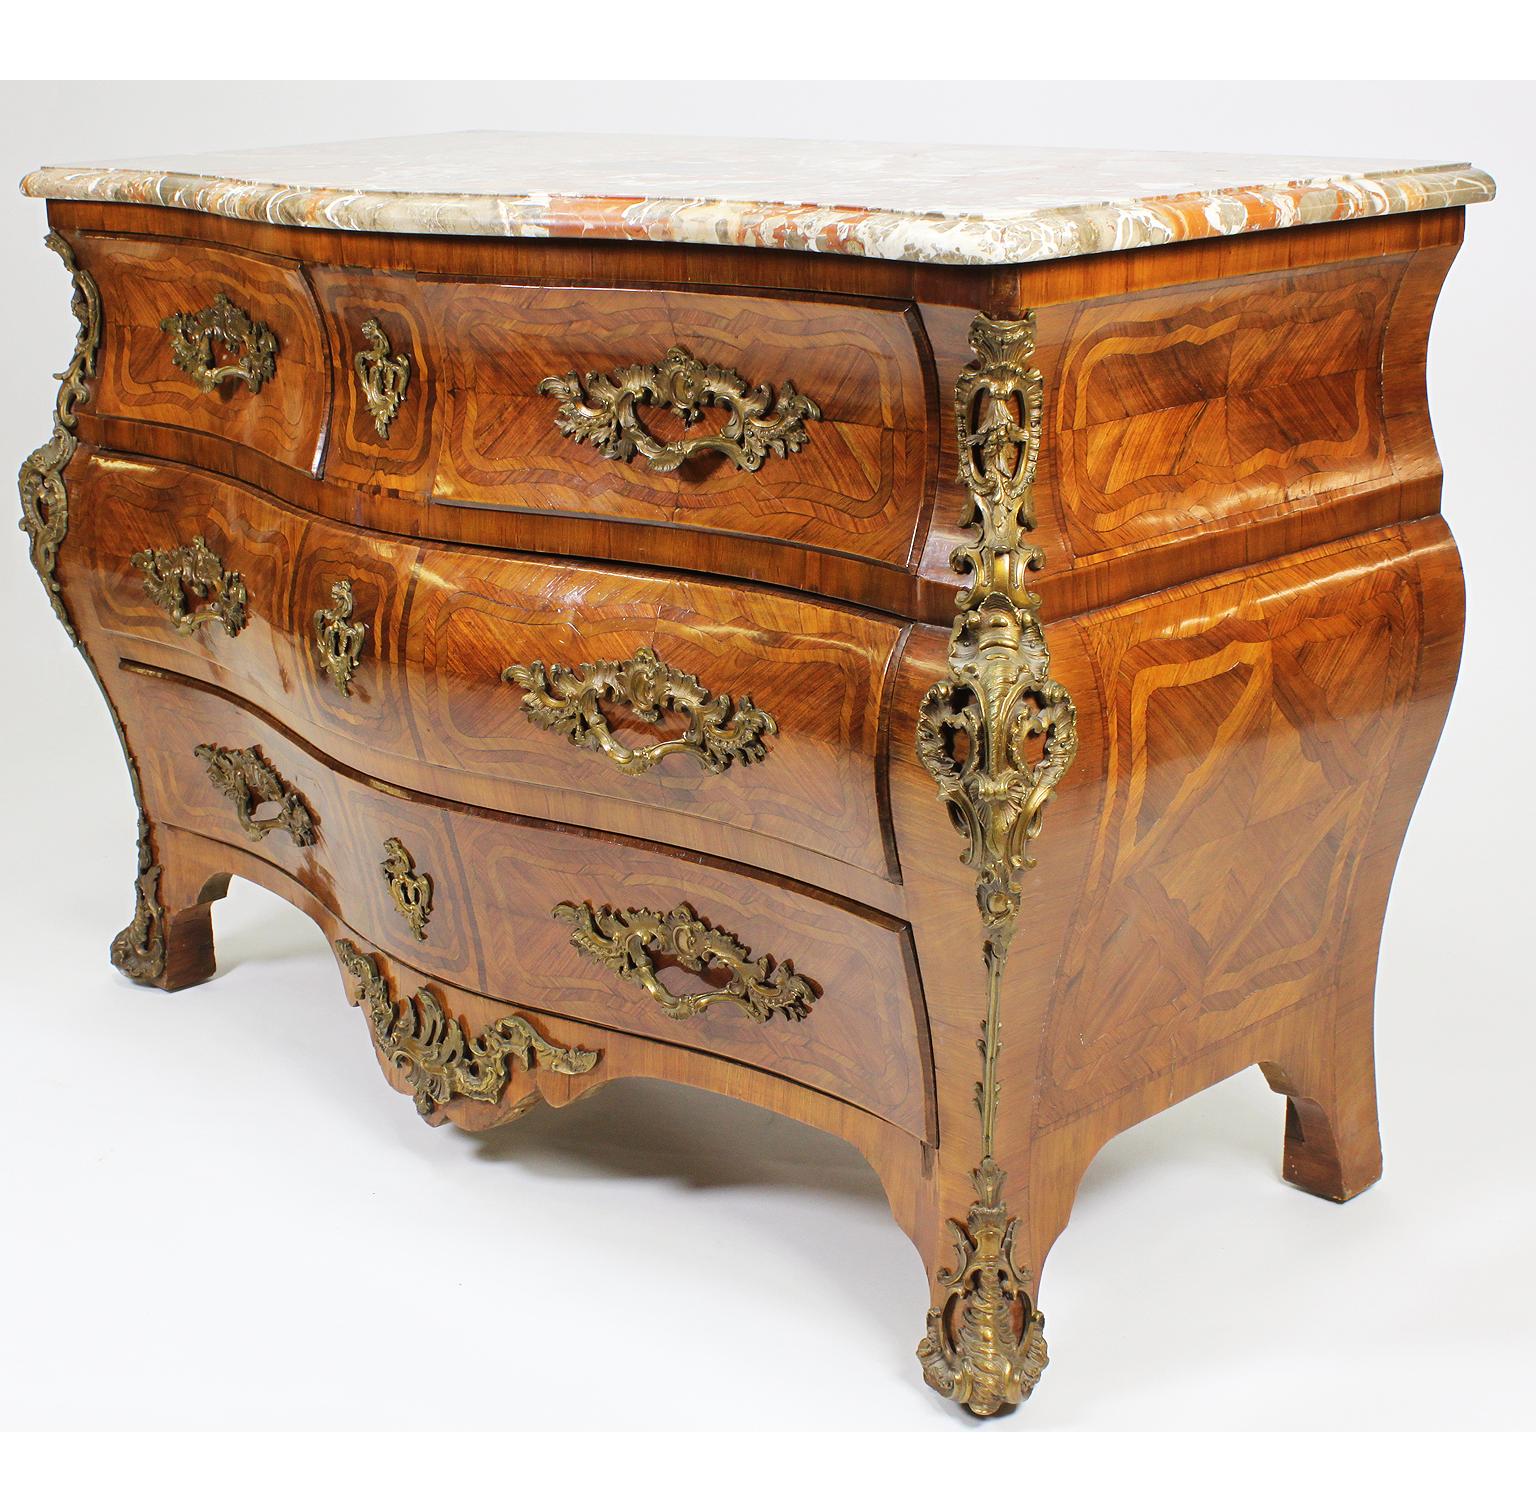 A French Regency Revival 19th/20th Century Transitional Louis XV/XVI Style Gilt-Bronze Mounted Kingwood and Tulipwood Parquetry Five-Drawer Commode with Marble Top. The bombé serpentine form body with a veined marble top above two upper drawers and